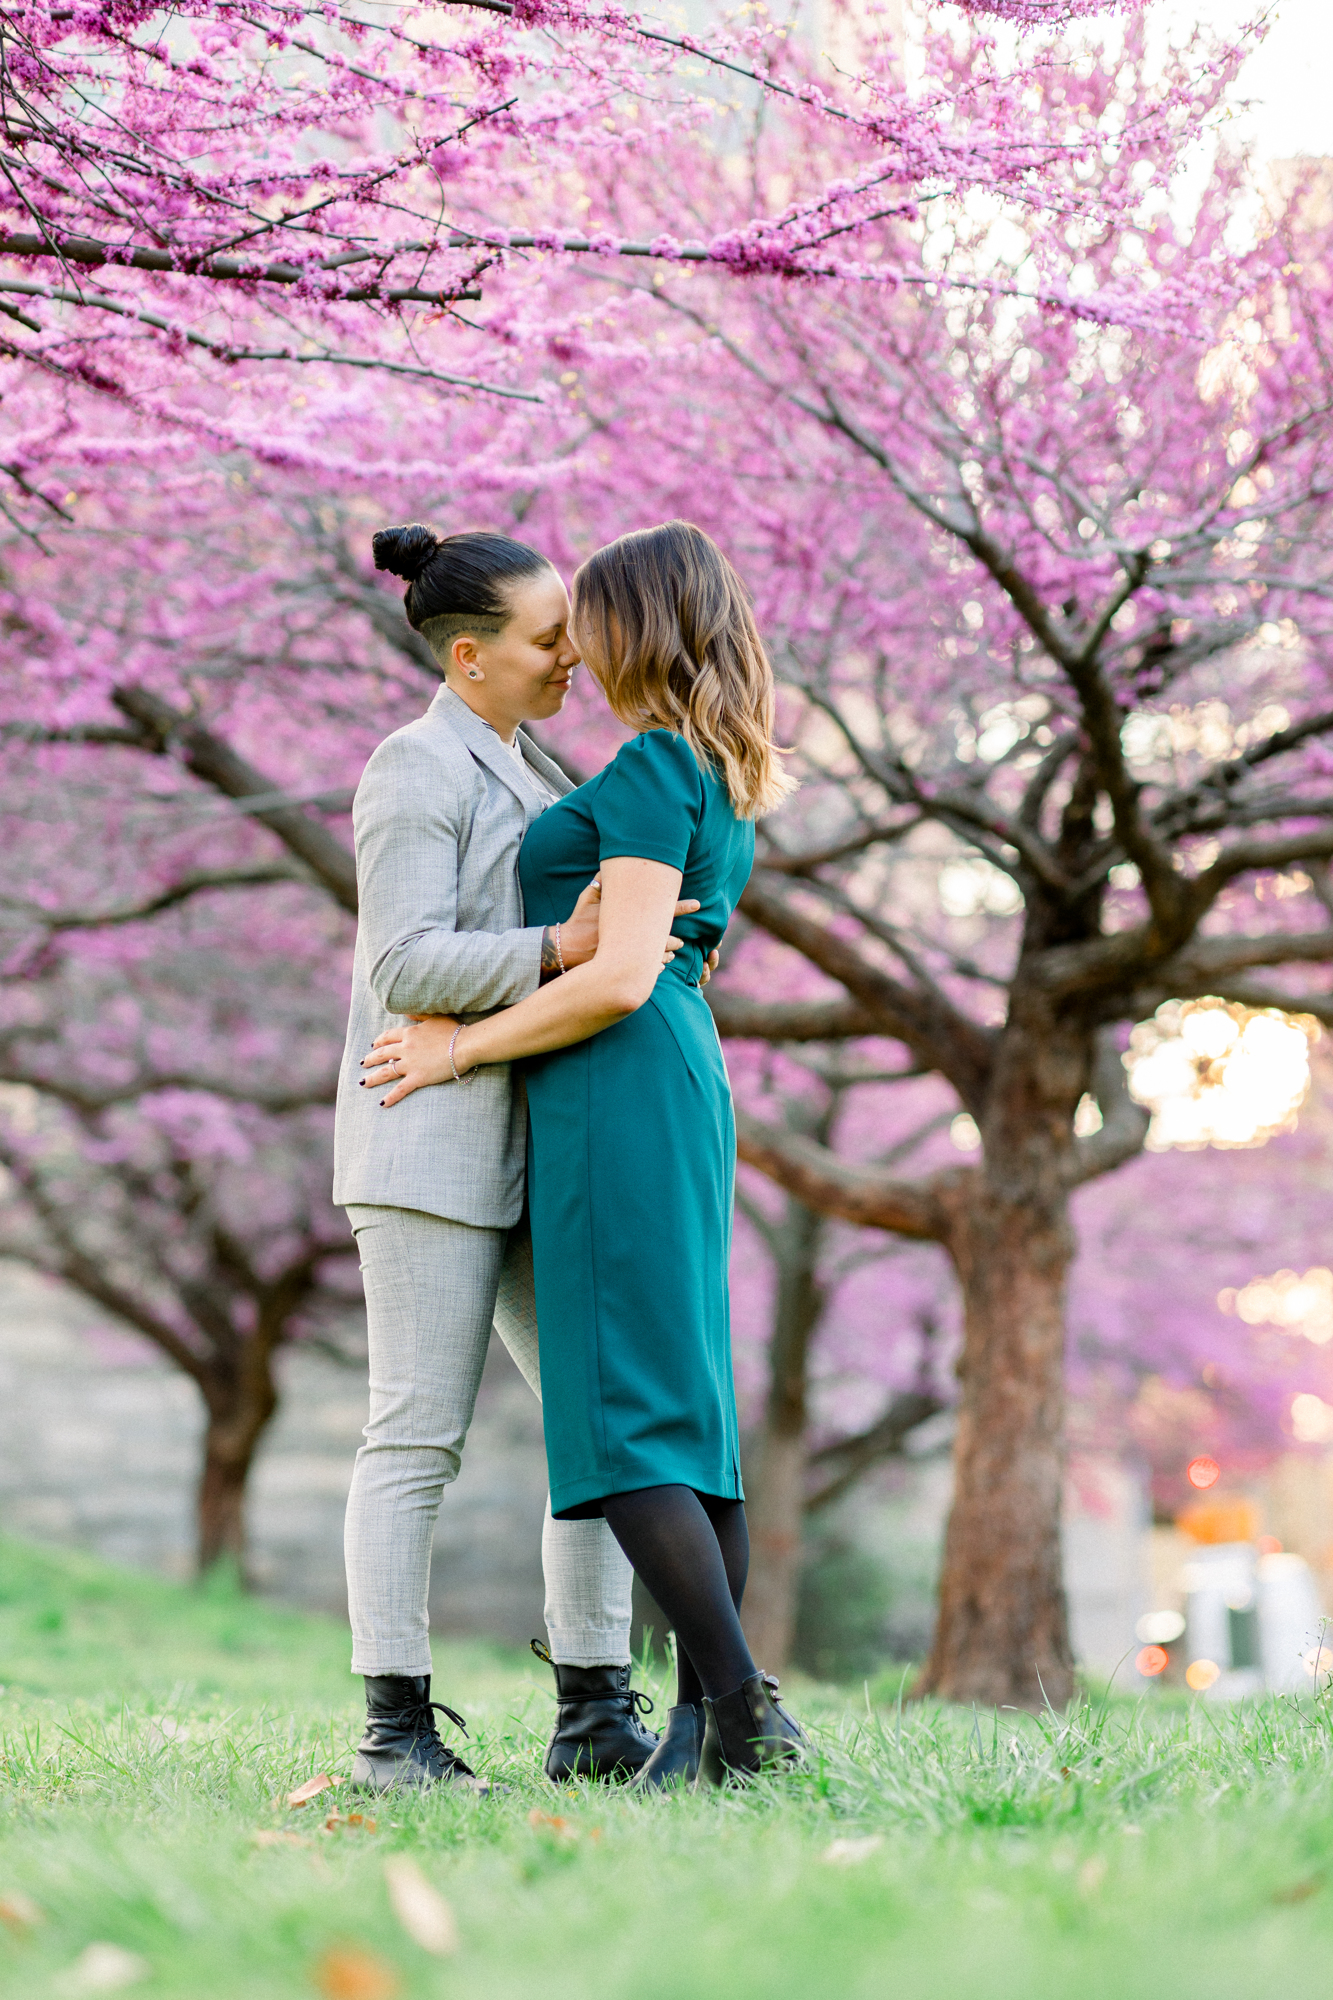 Romantic NYC Engagement Photography with Spring Blossoms